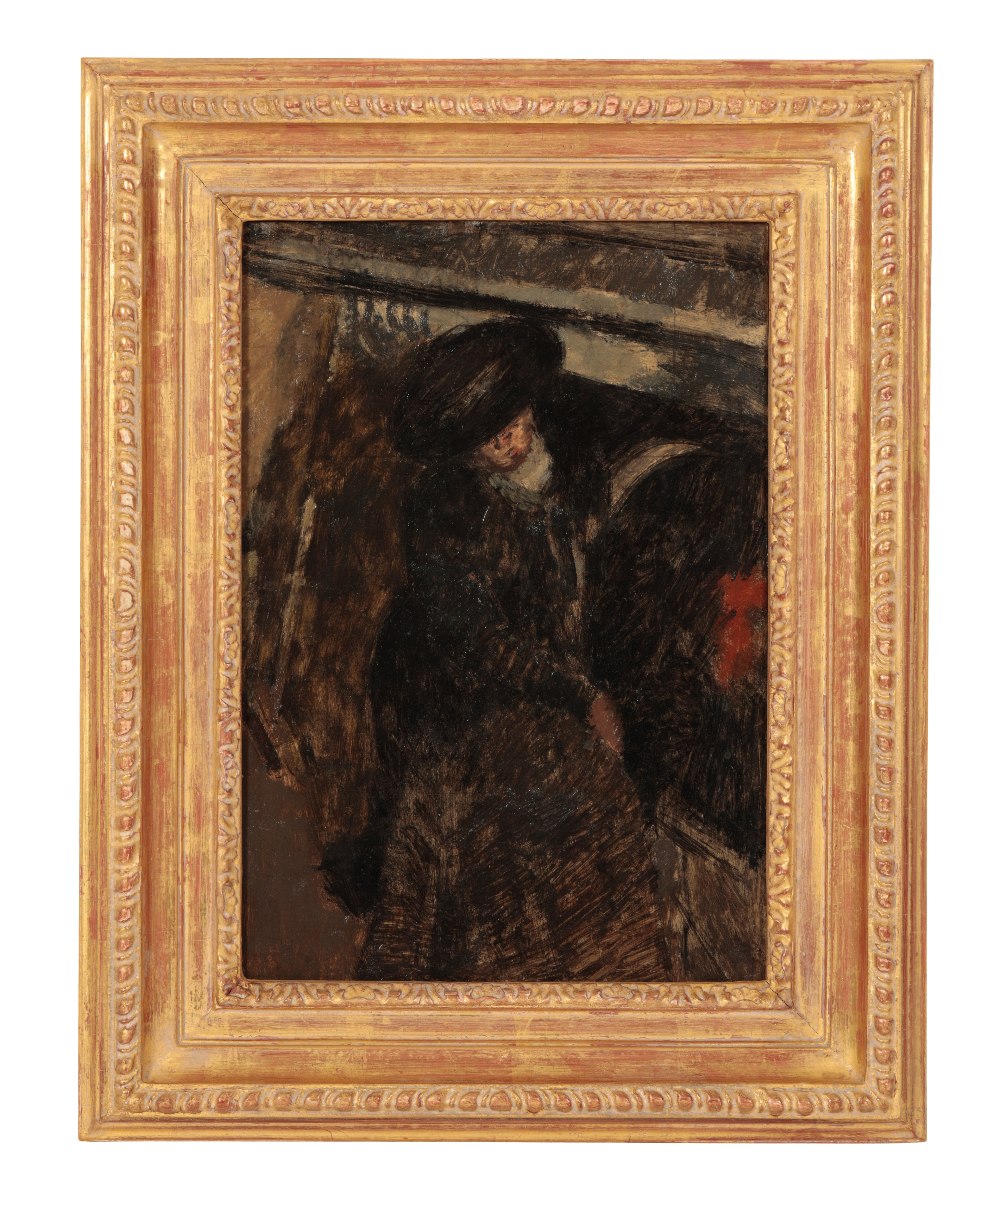 WALTER RICHARD SICKERT (1860-1942) 'Study for The New Home' - Image 2 of 3